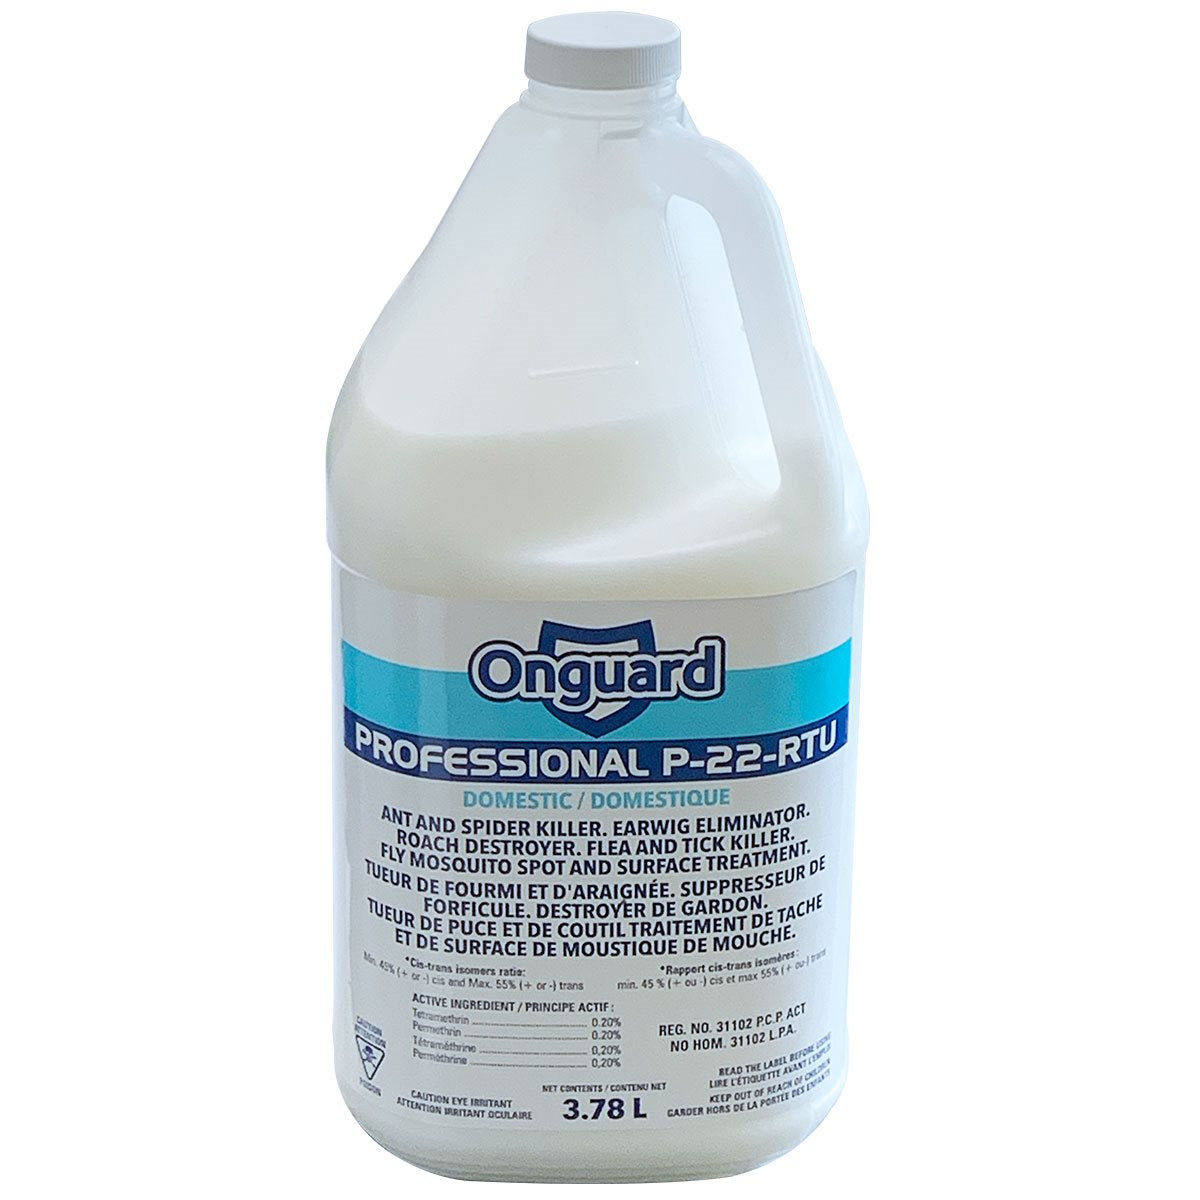 Onguard Professional Insecticide P-22-RTU 4 Liter